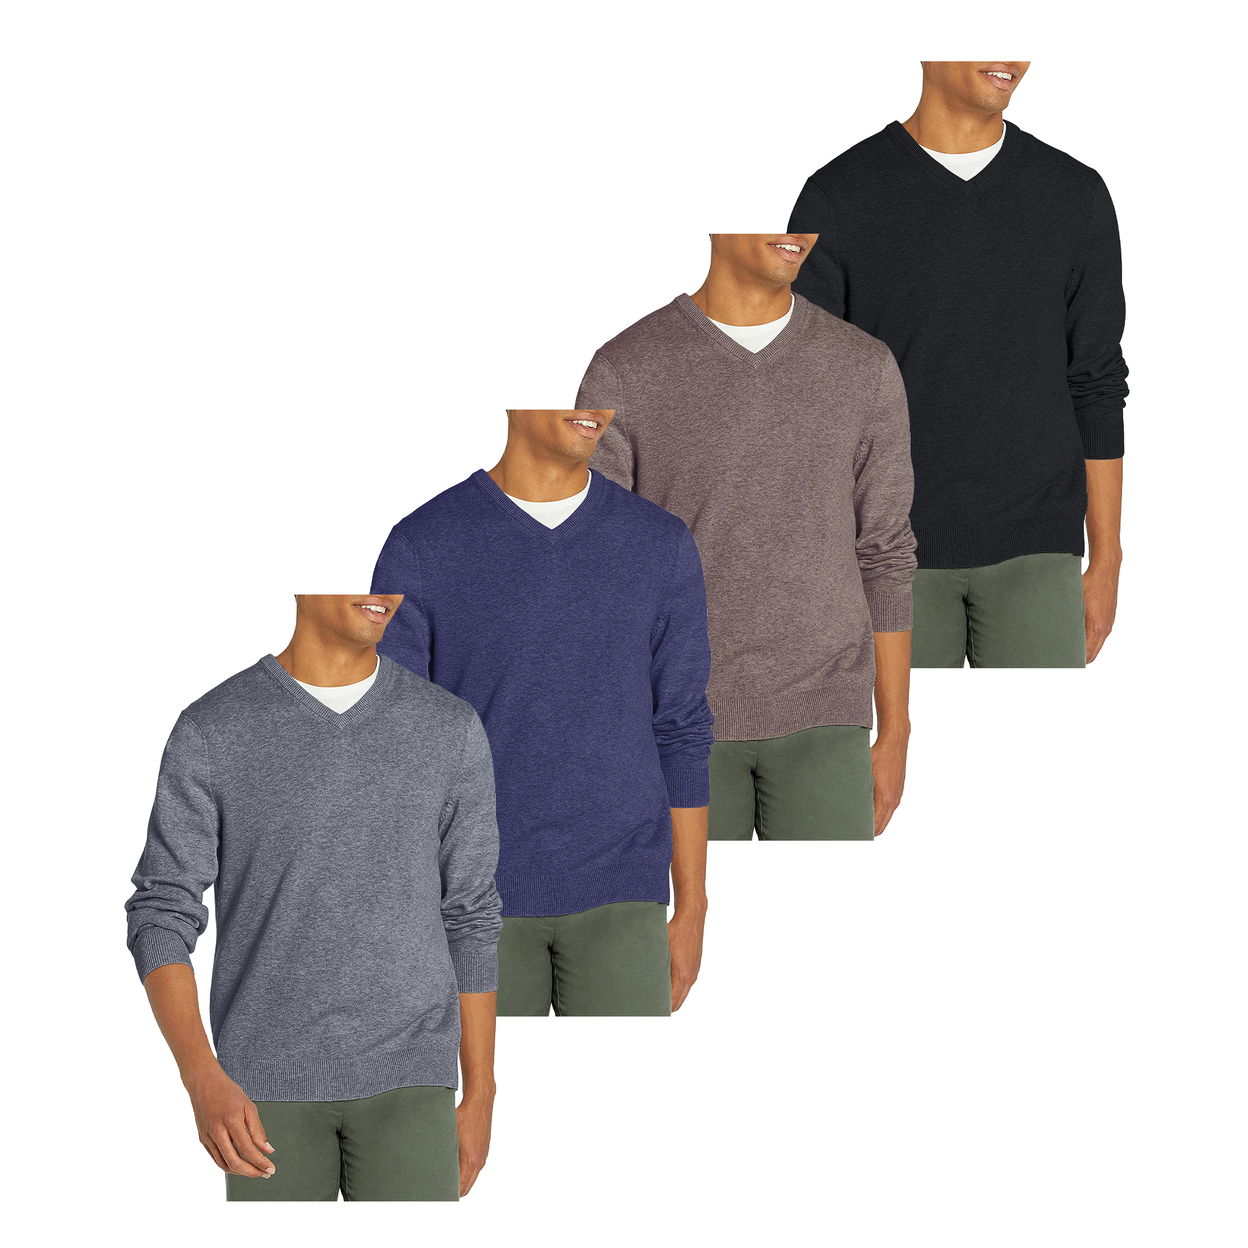 Multi-Pack: Men's Casual Ultra Soft Slim Fit Warm Knit V-Neck Sweater - 1-pack, Large